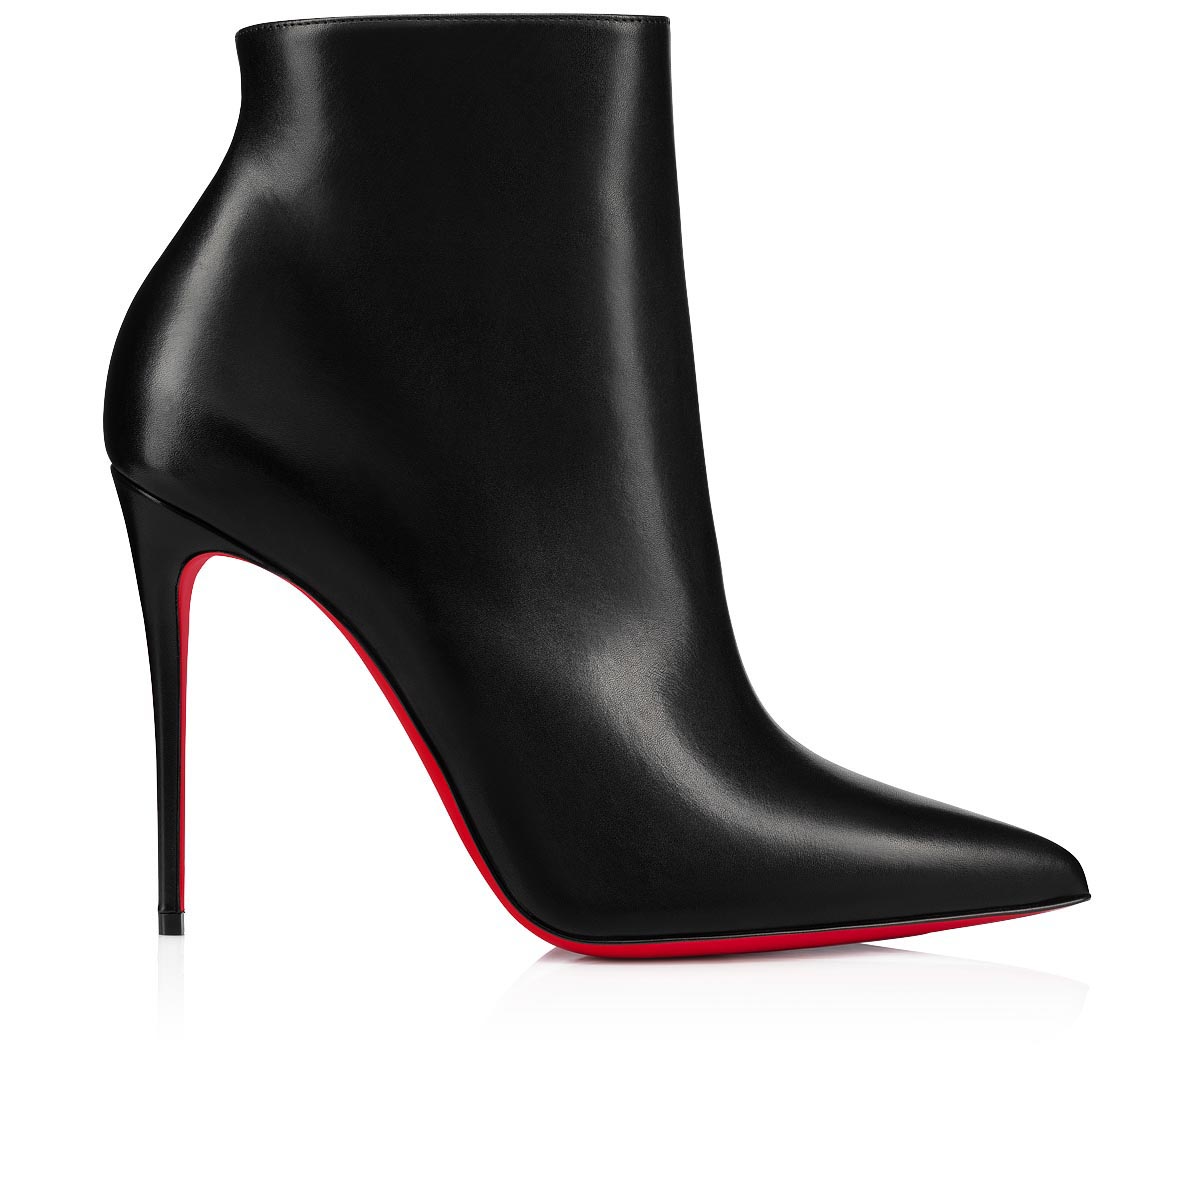 Christian Louboutin Women's So Kate 100 Suede Boots